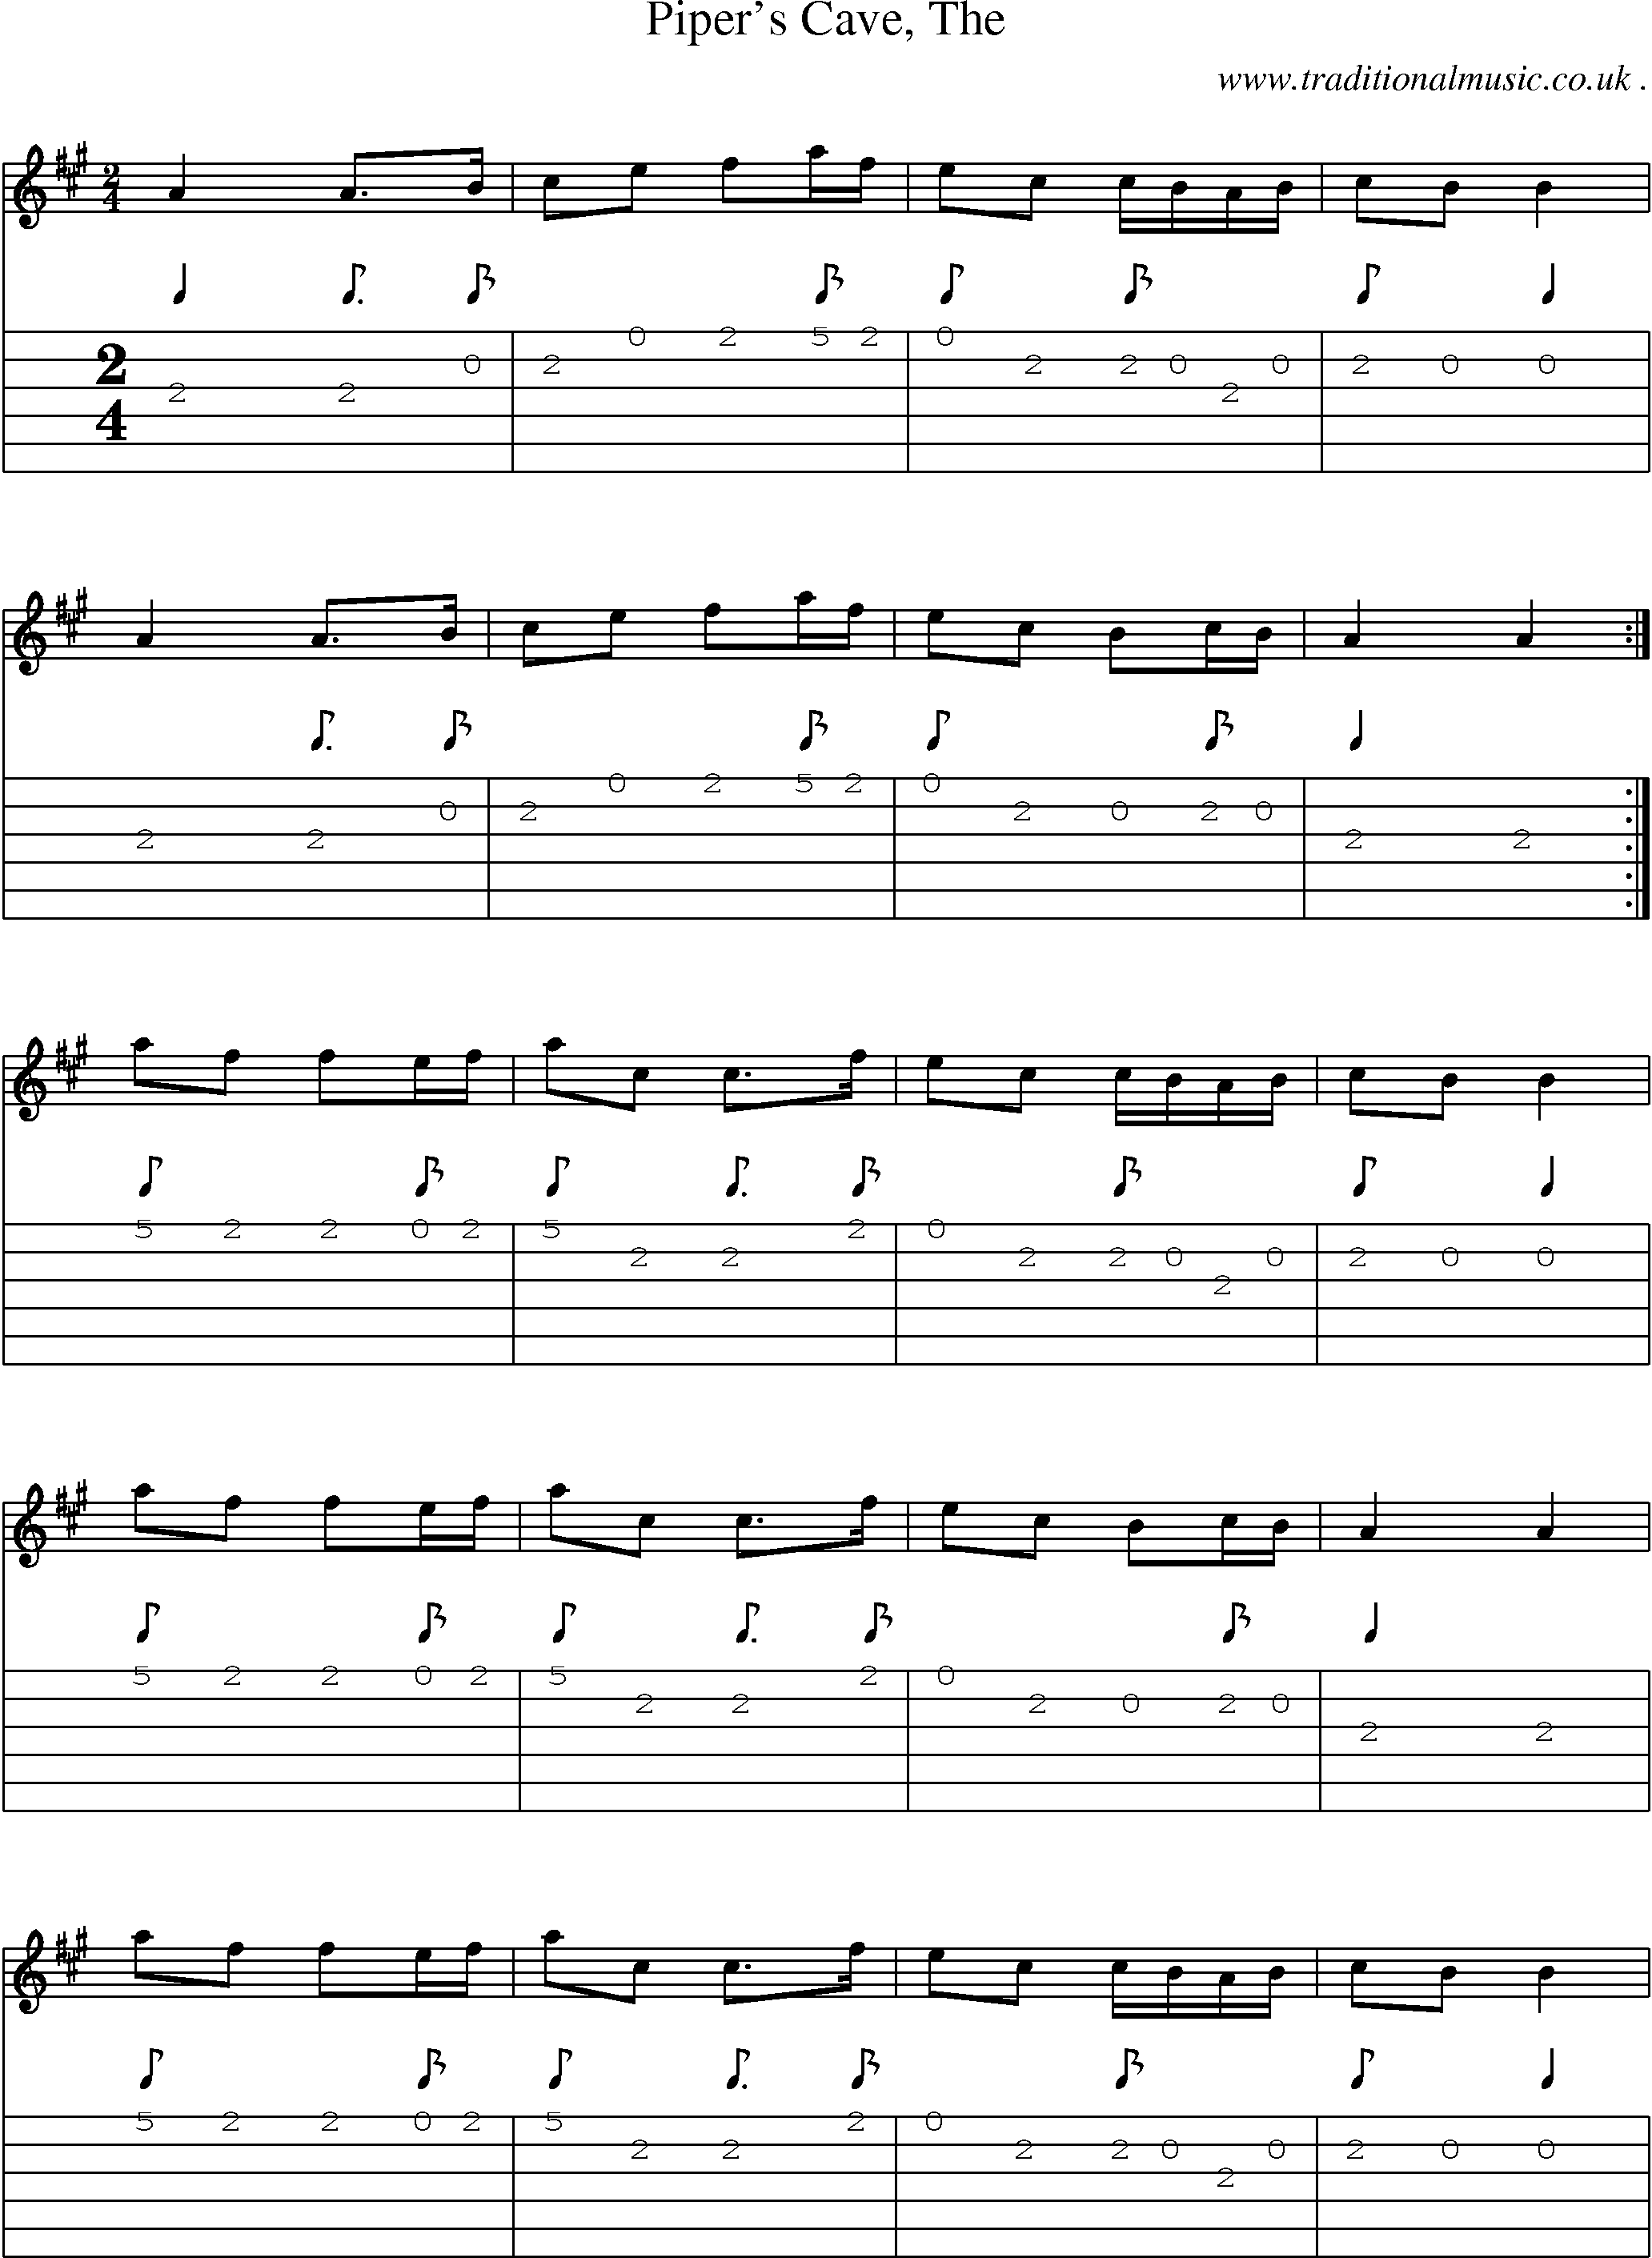 Sheet-music  score, Chords and Guitar Tabs for Pipers Cave The